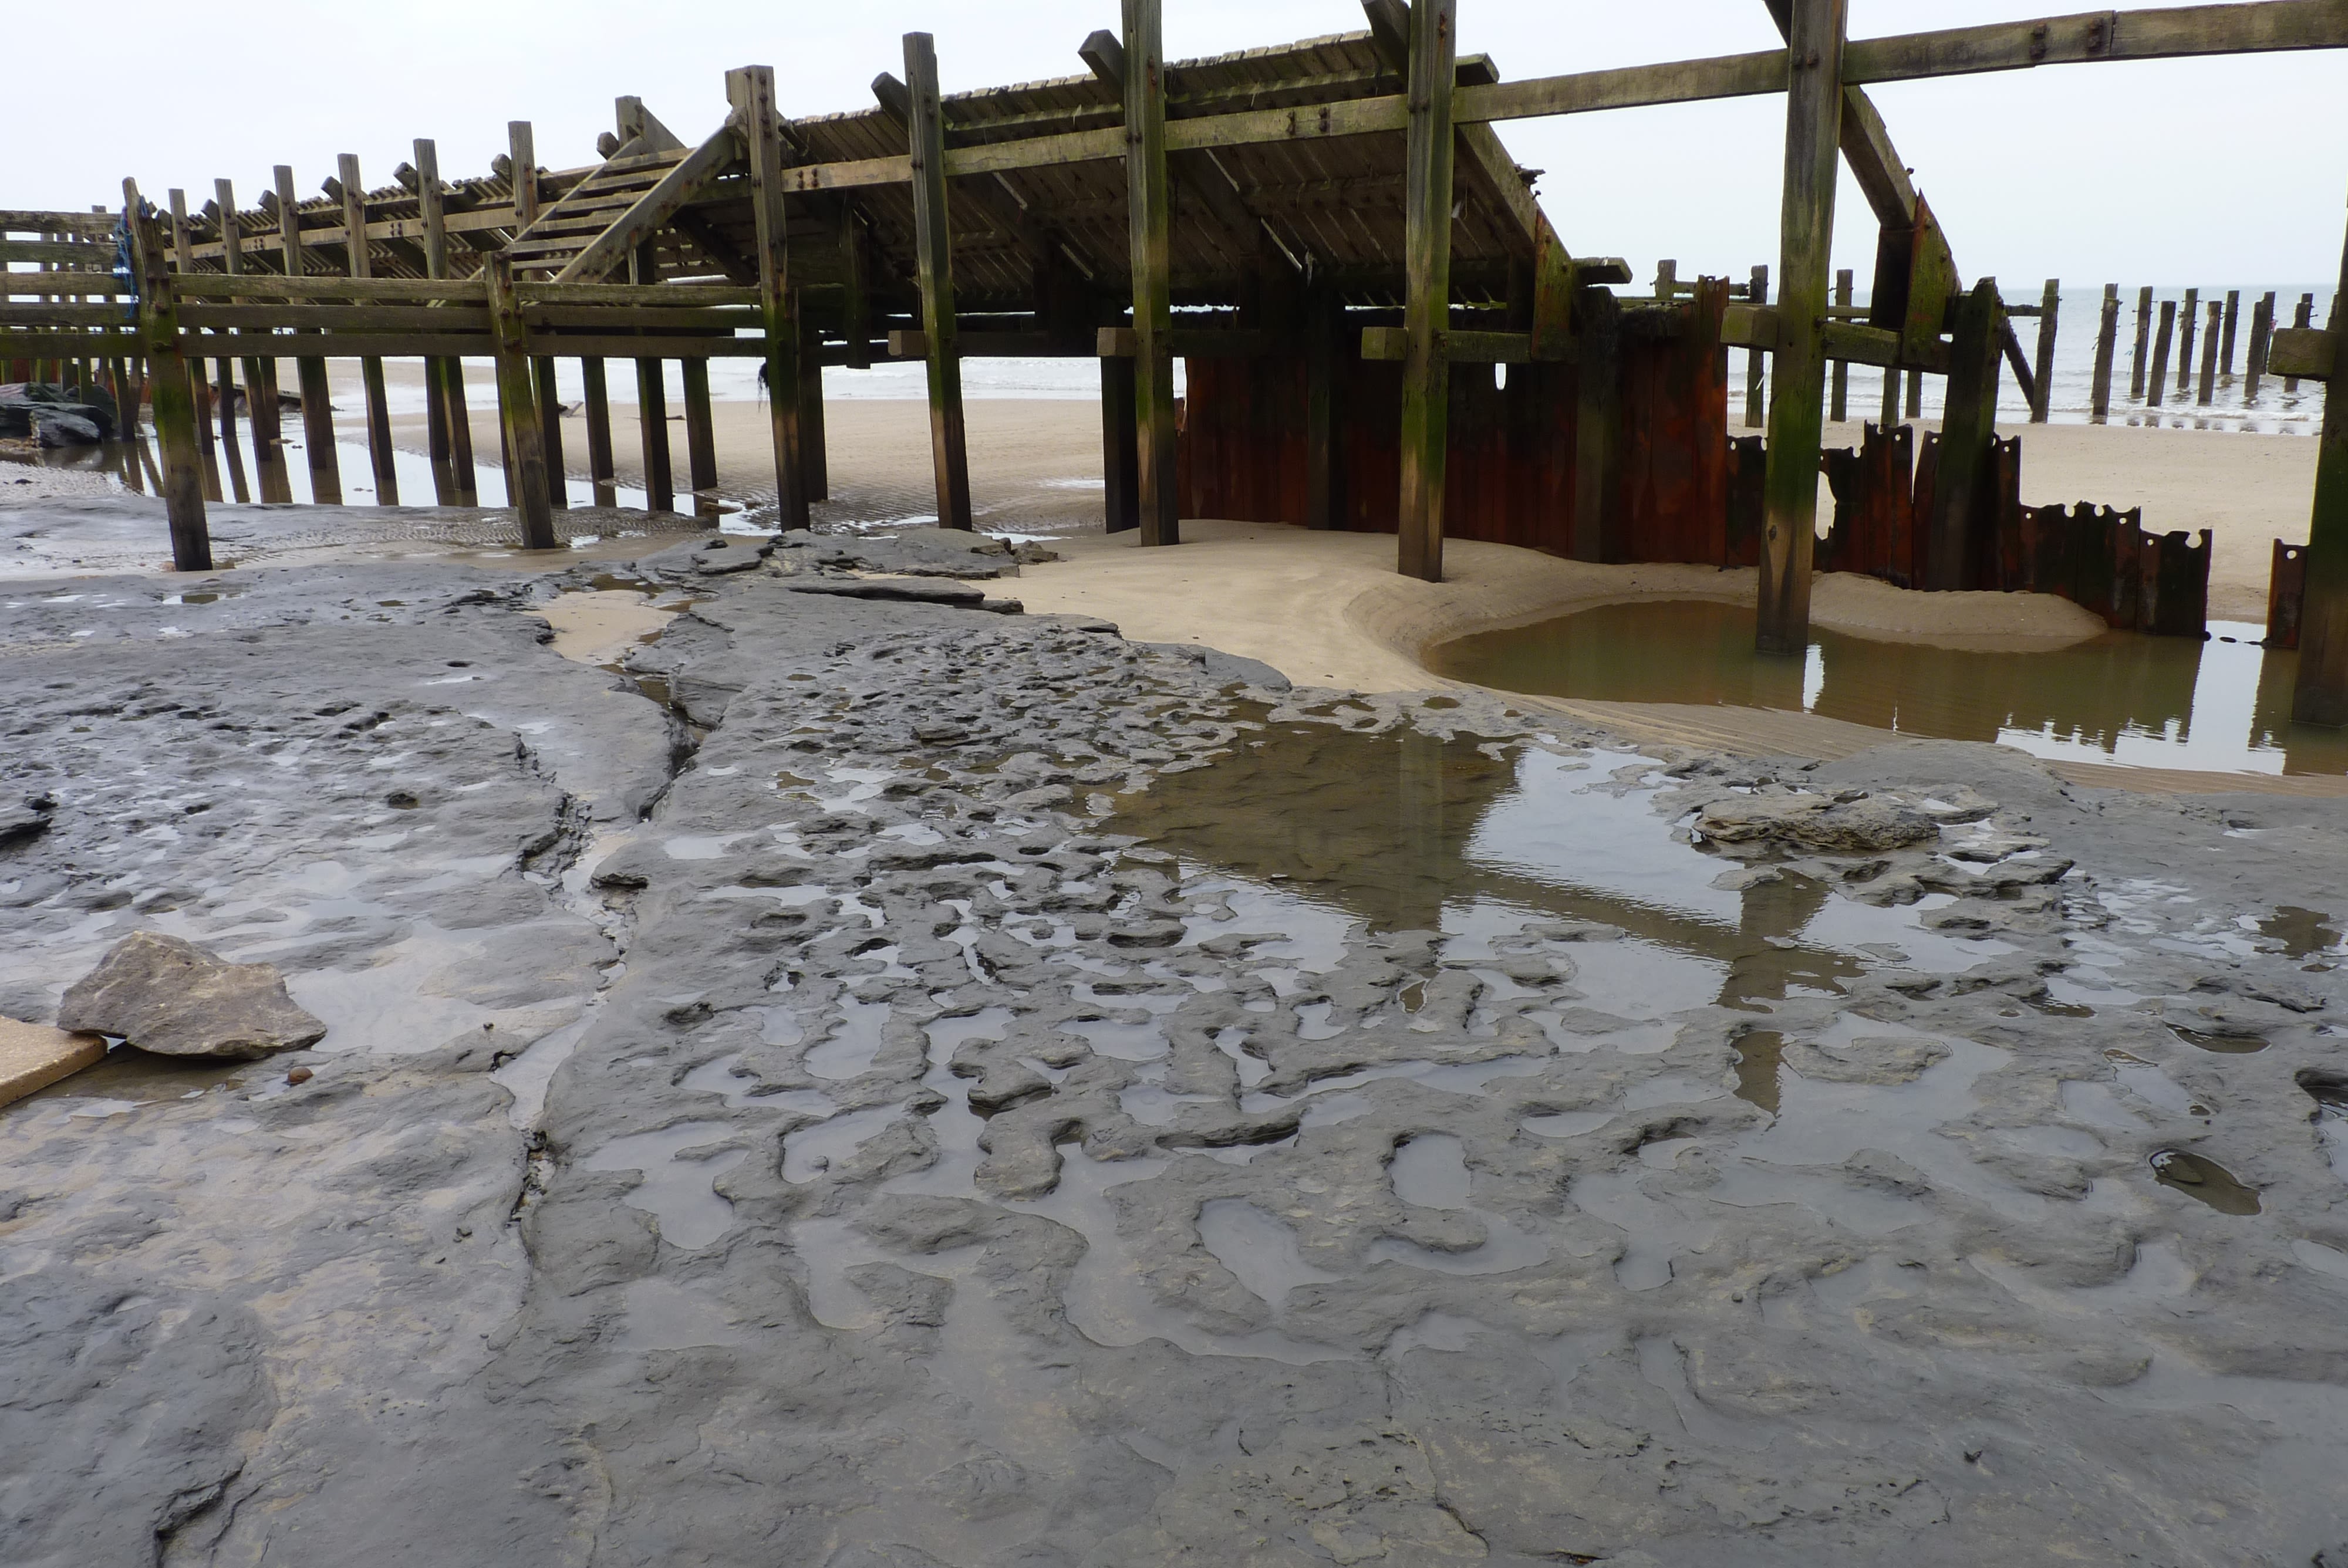 A photograph of mud, with a wooden structure visible and the sea in the distance. Water has pooled in the muddy river, making children's footprints visible.